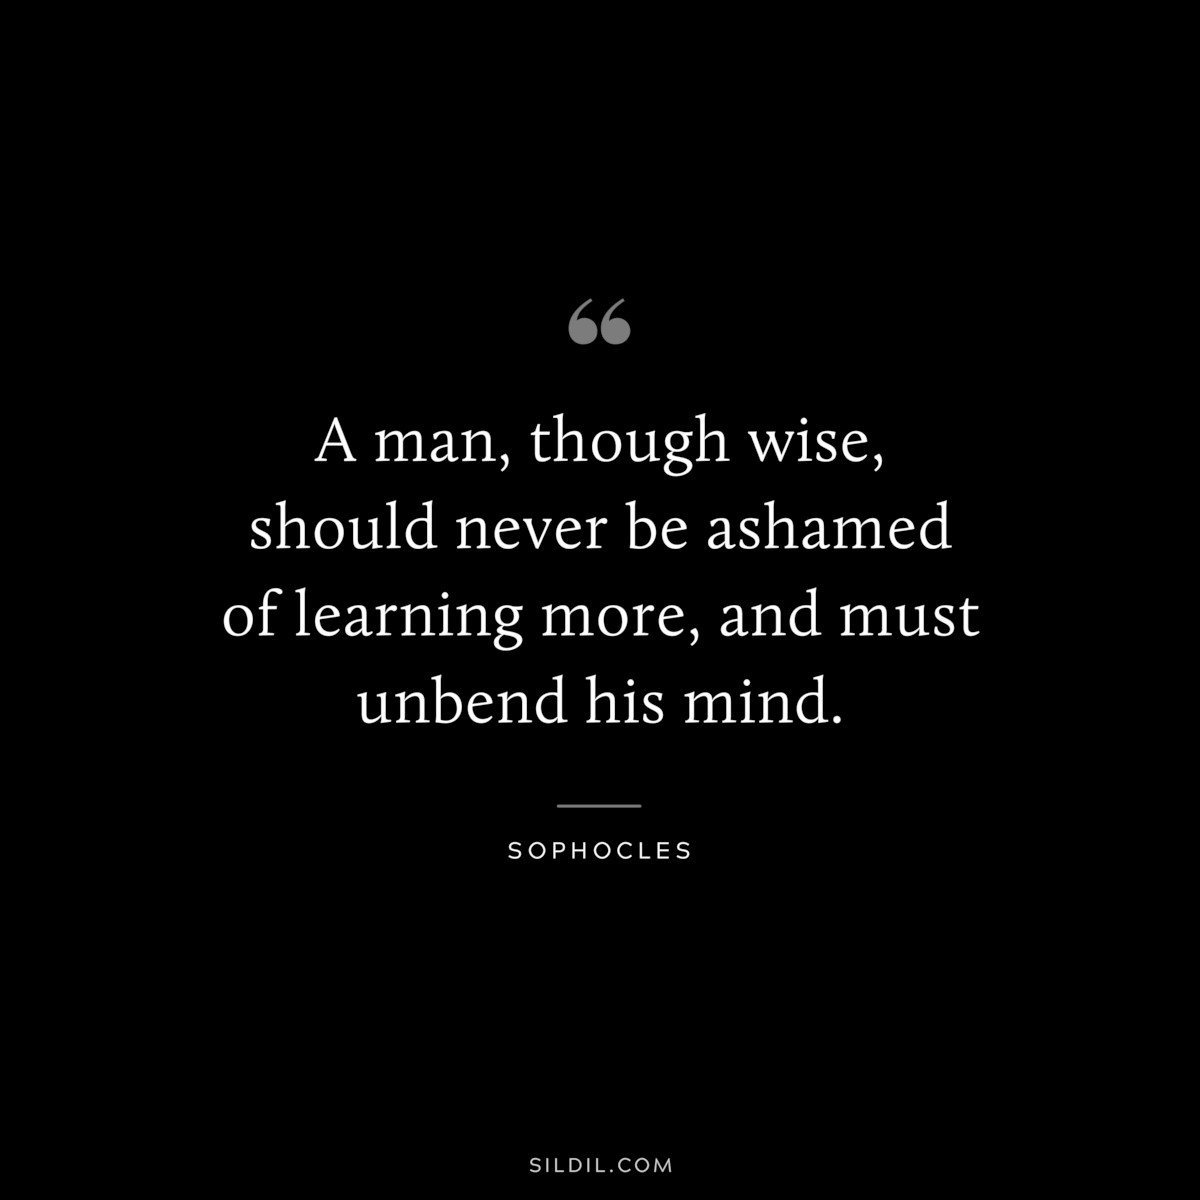 A man, though wise, should never be ashamed of learning more, and must unbend his mind. ― Sophocles